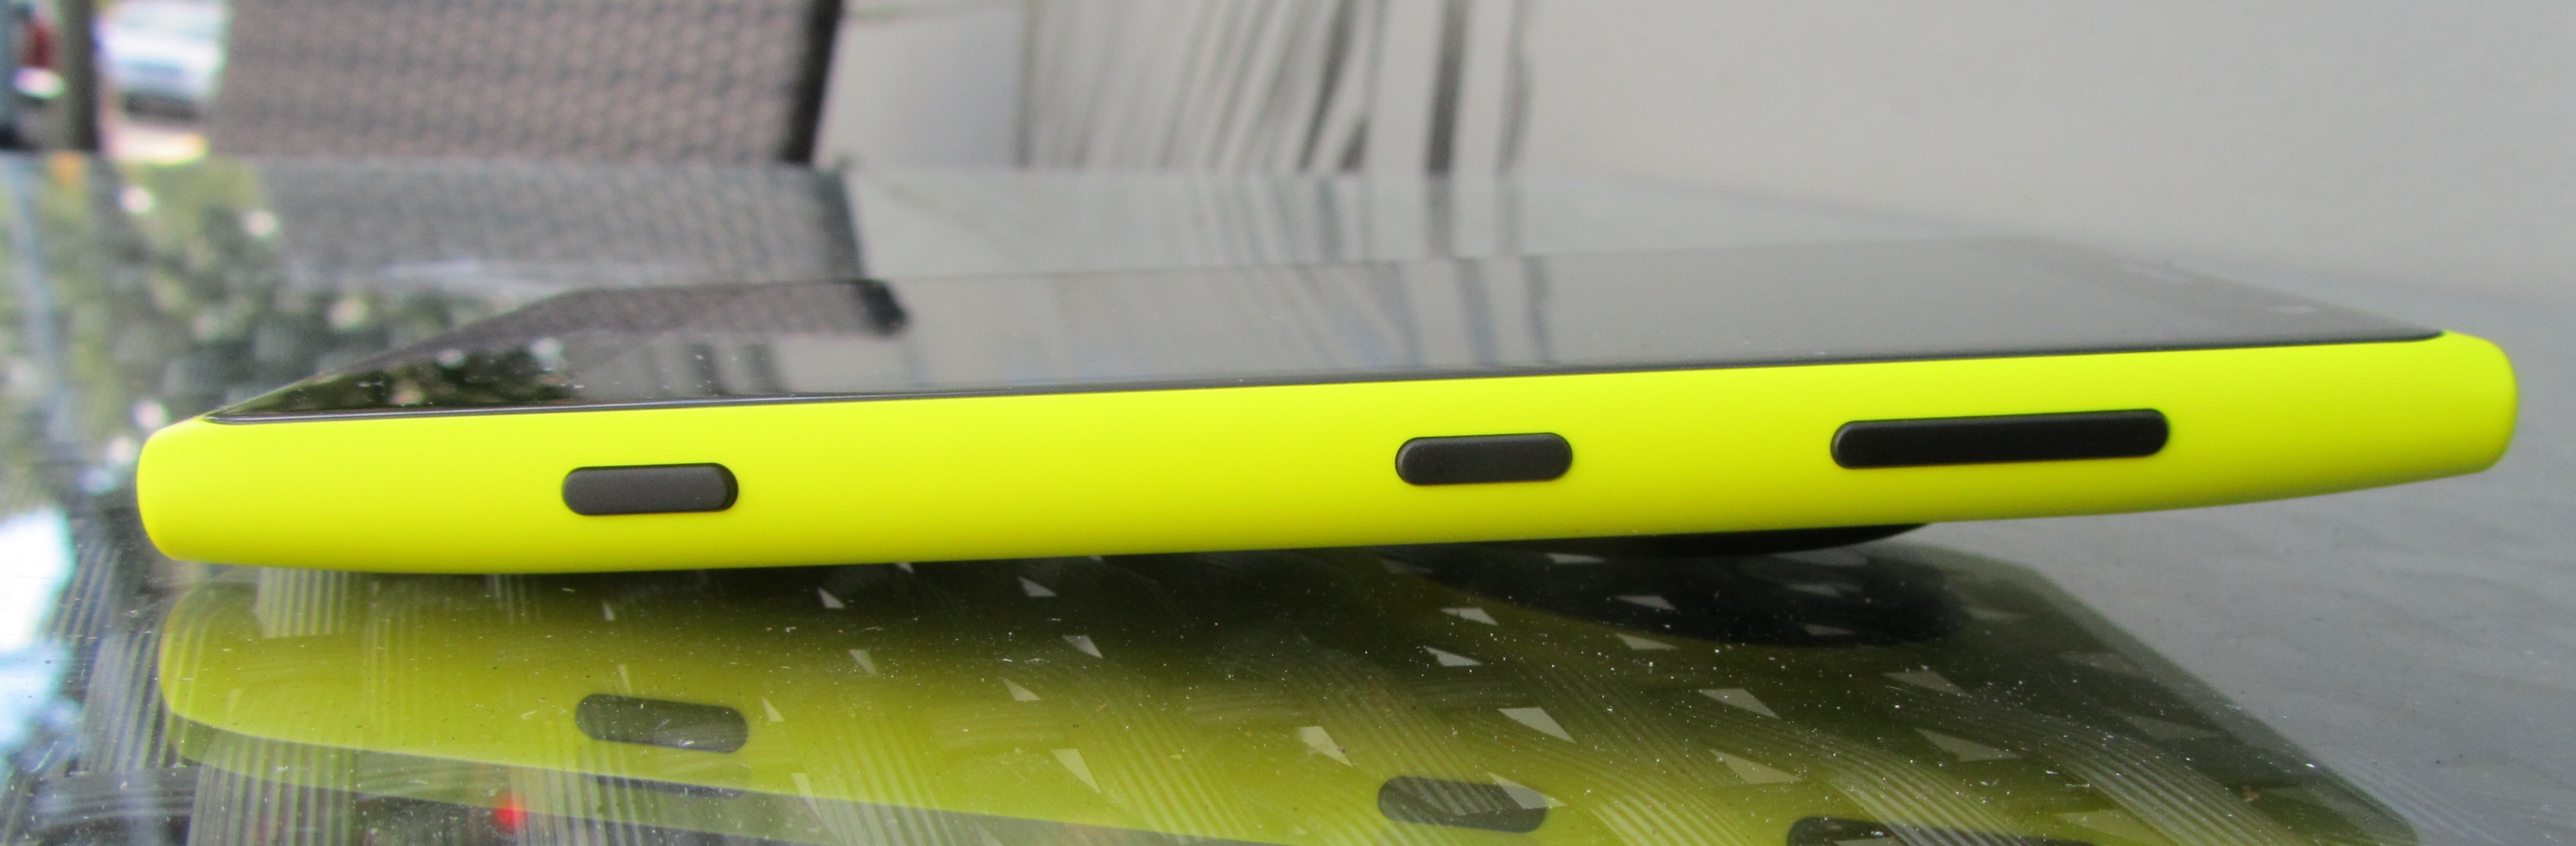 1020 on back Nokia Lumia 1020 review: The best camera phone, but not the best smartphone